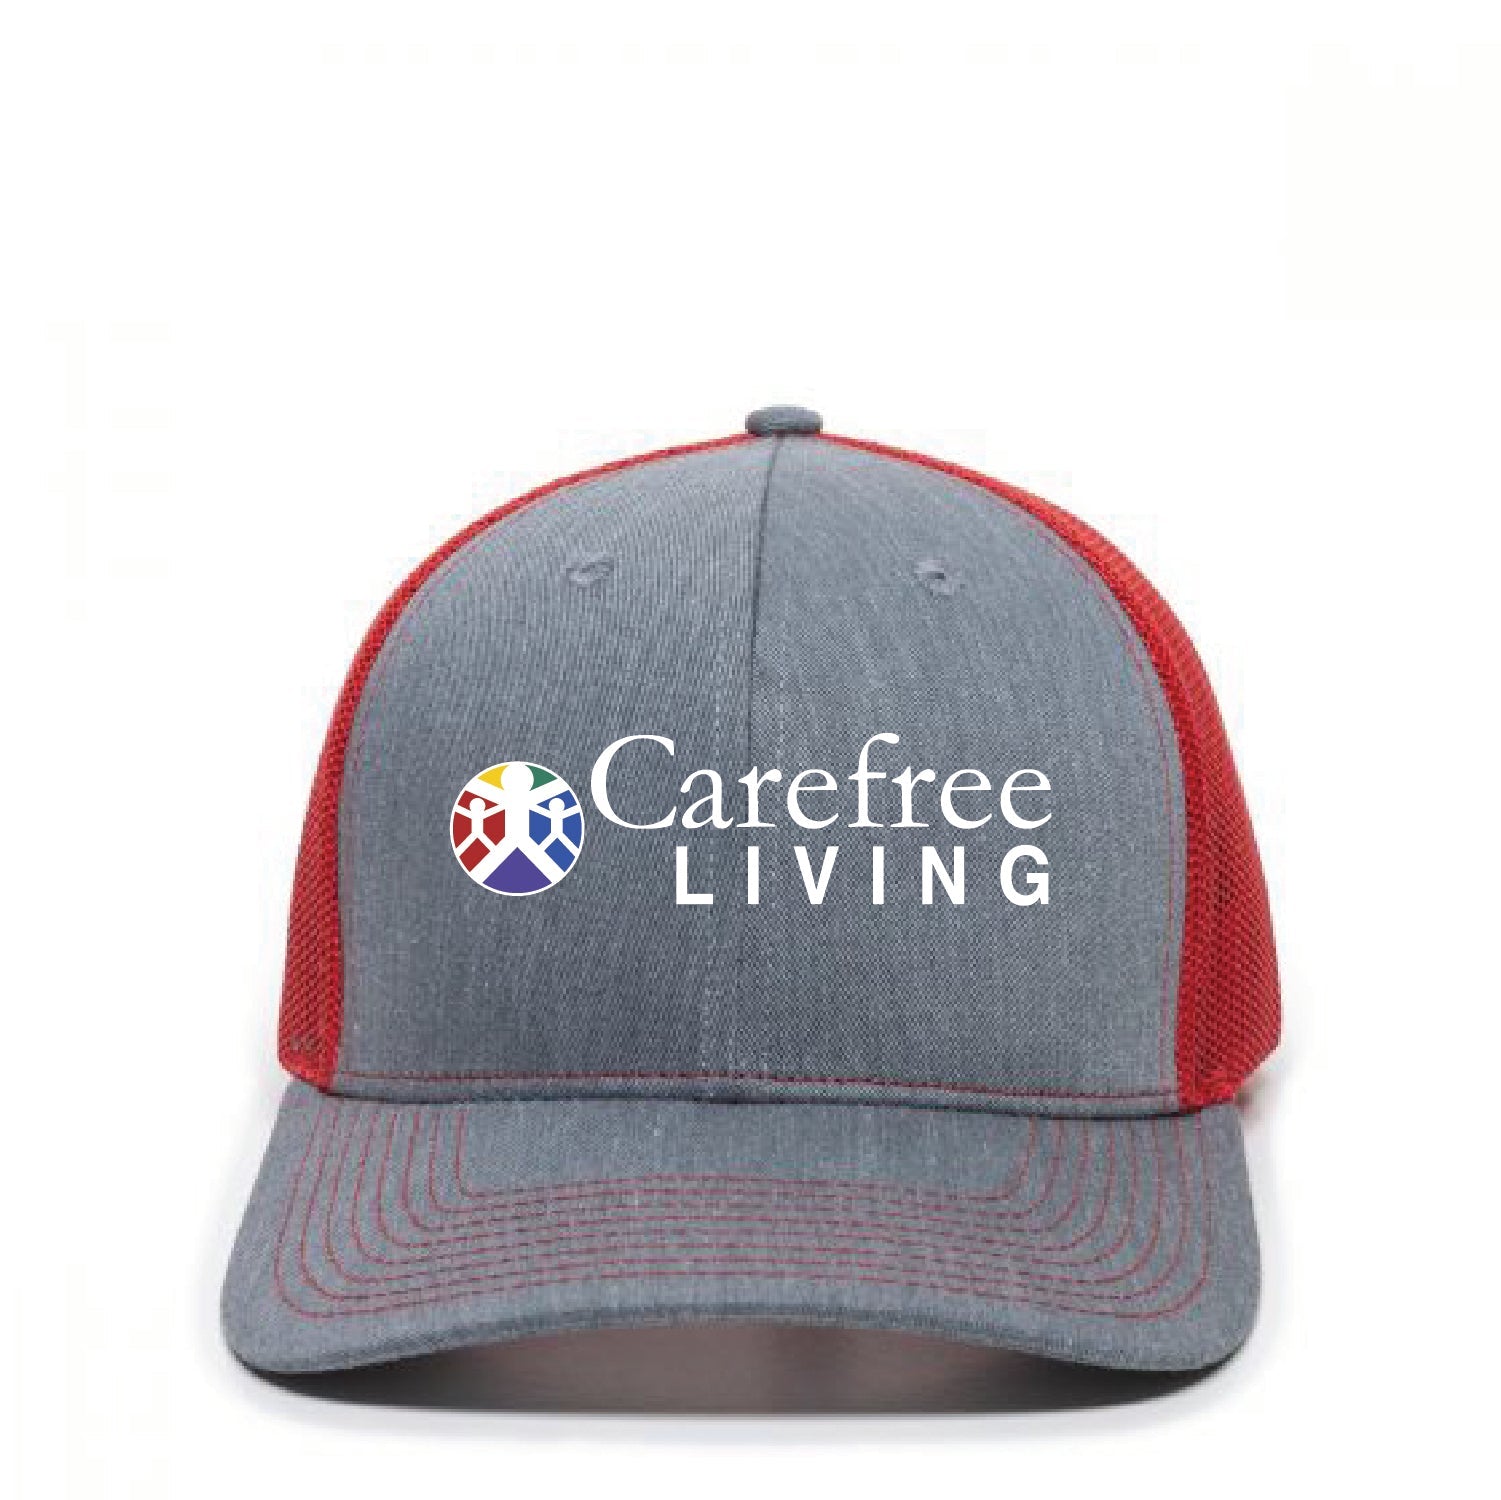 Carefree Living Trucker Hat - DSP On Demand